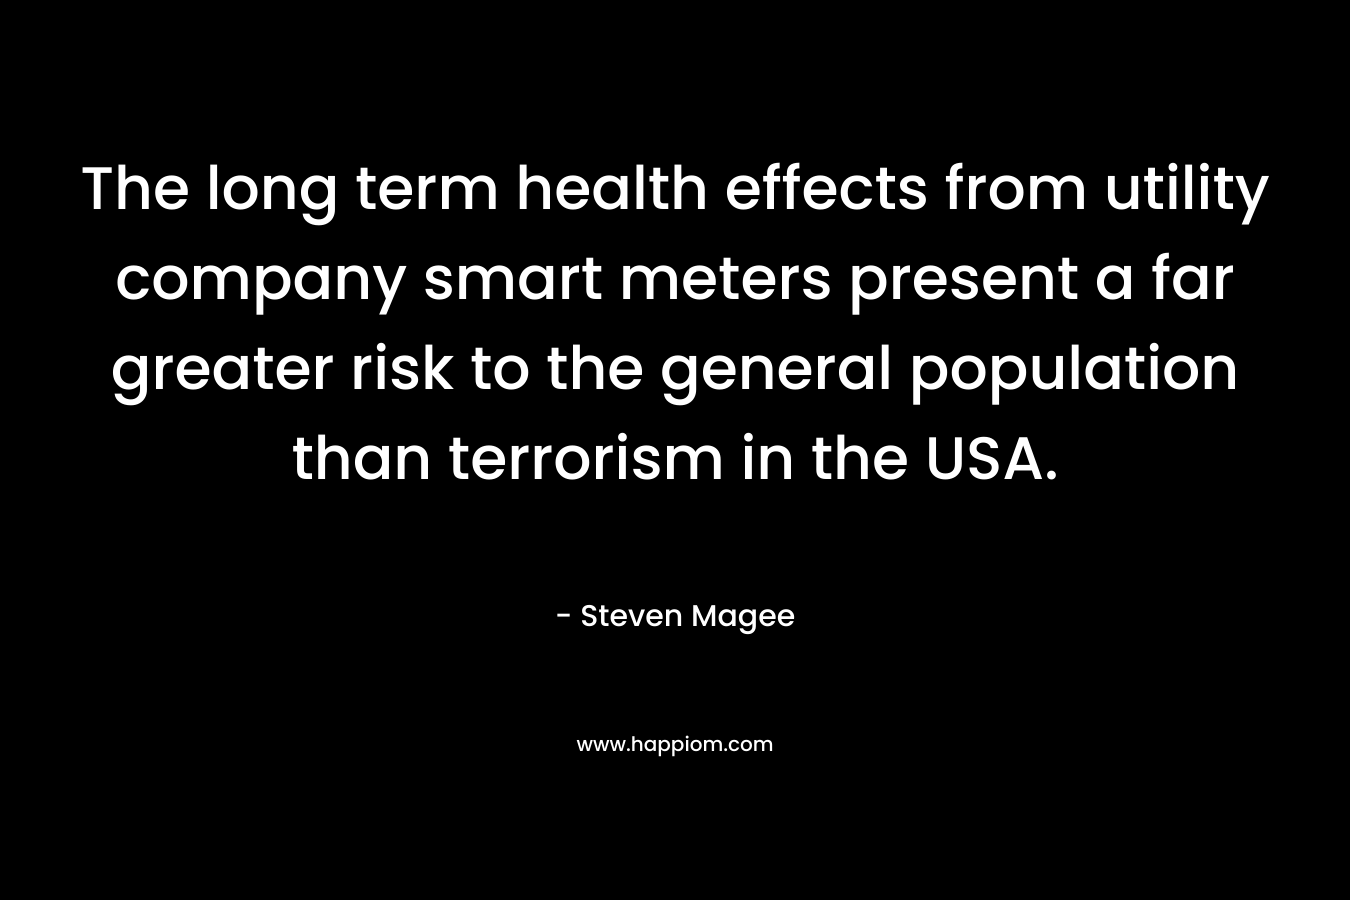 The long term health effects from utility company smart meters present a far greater risk to the general population than terrorism in the USA. – Steven Magee